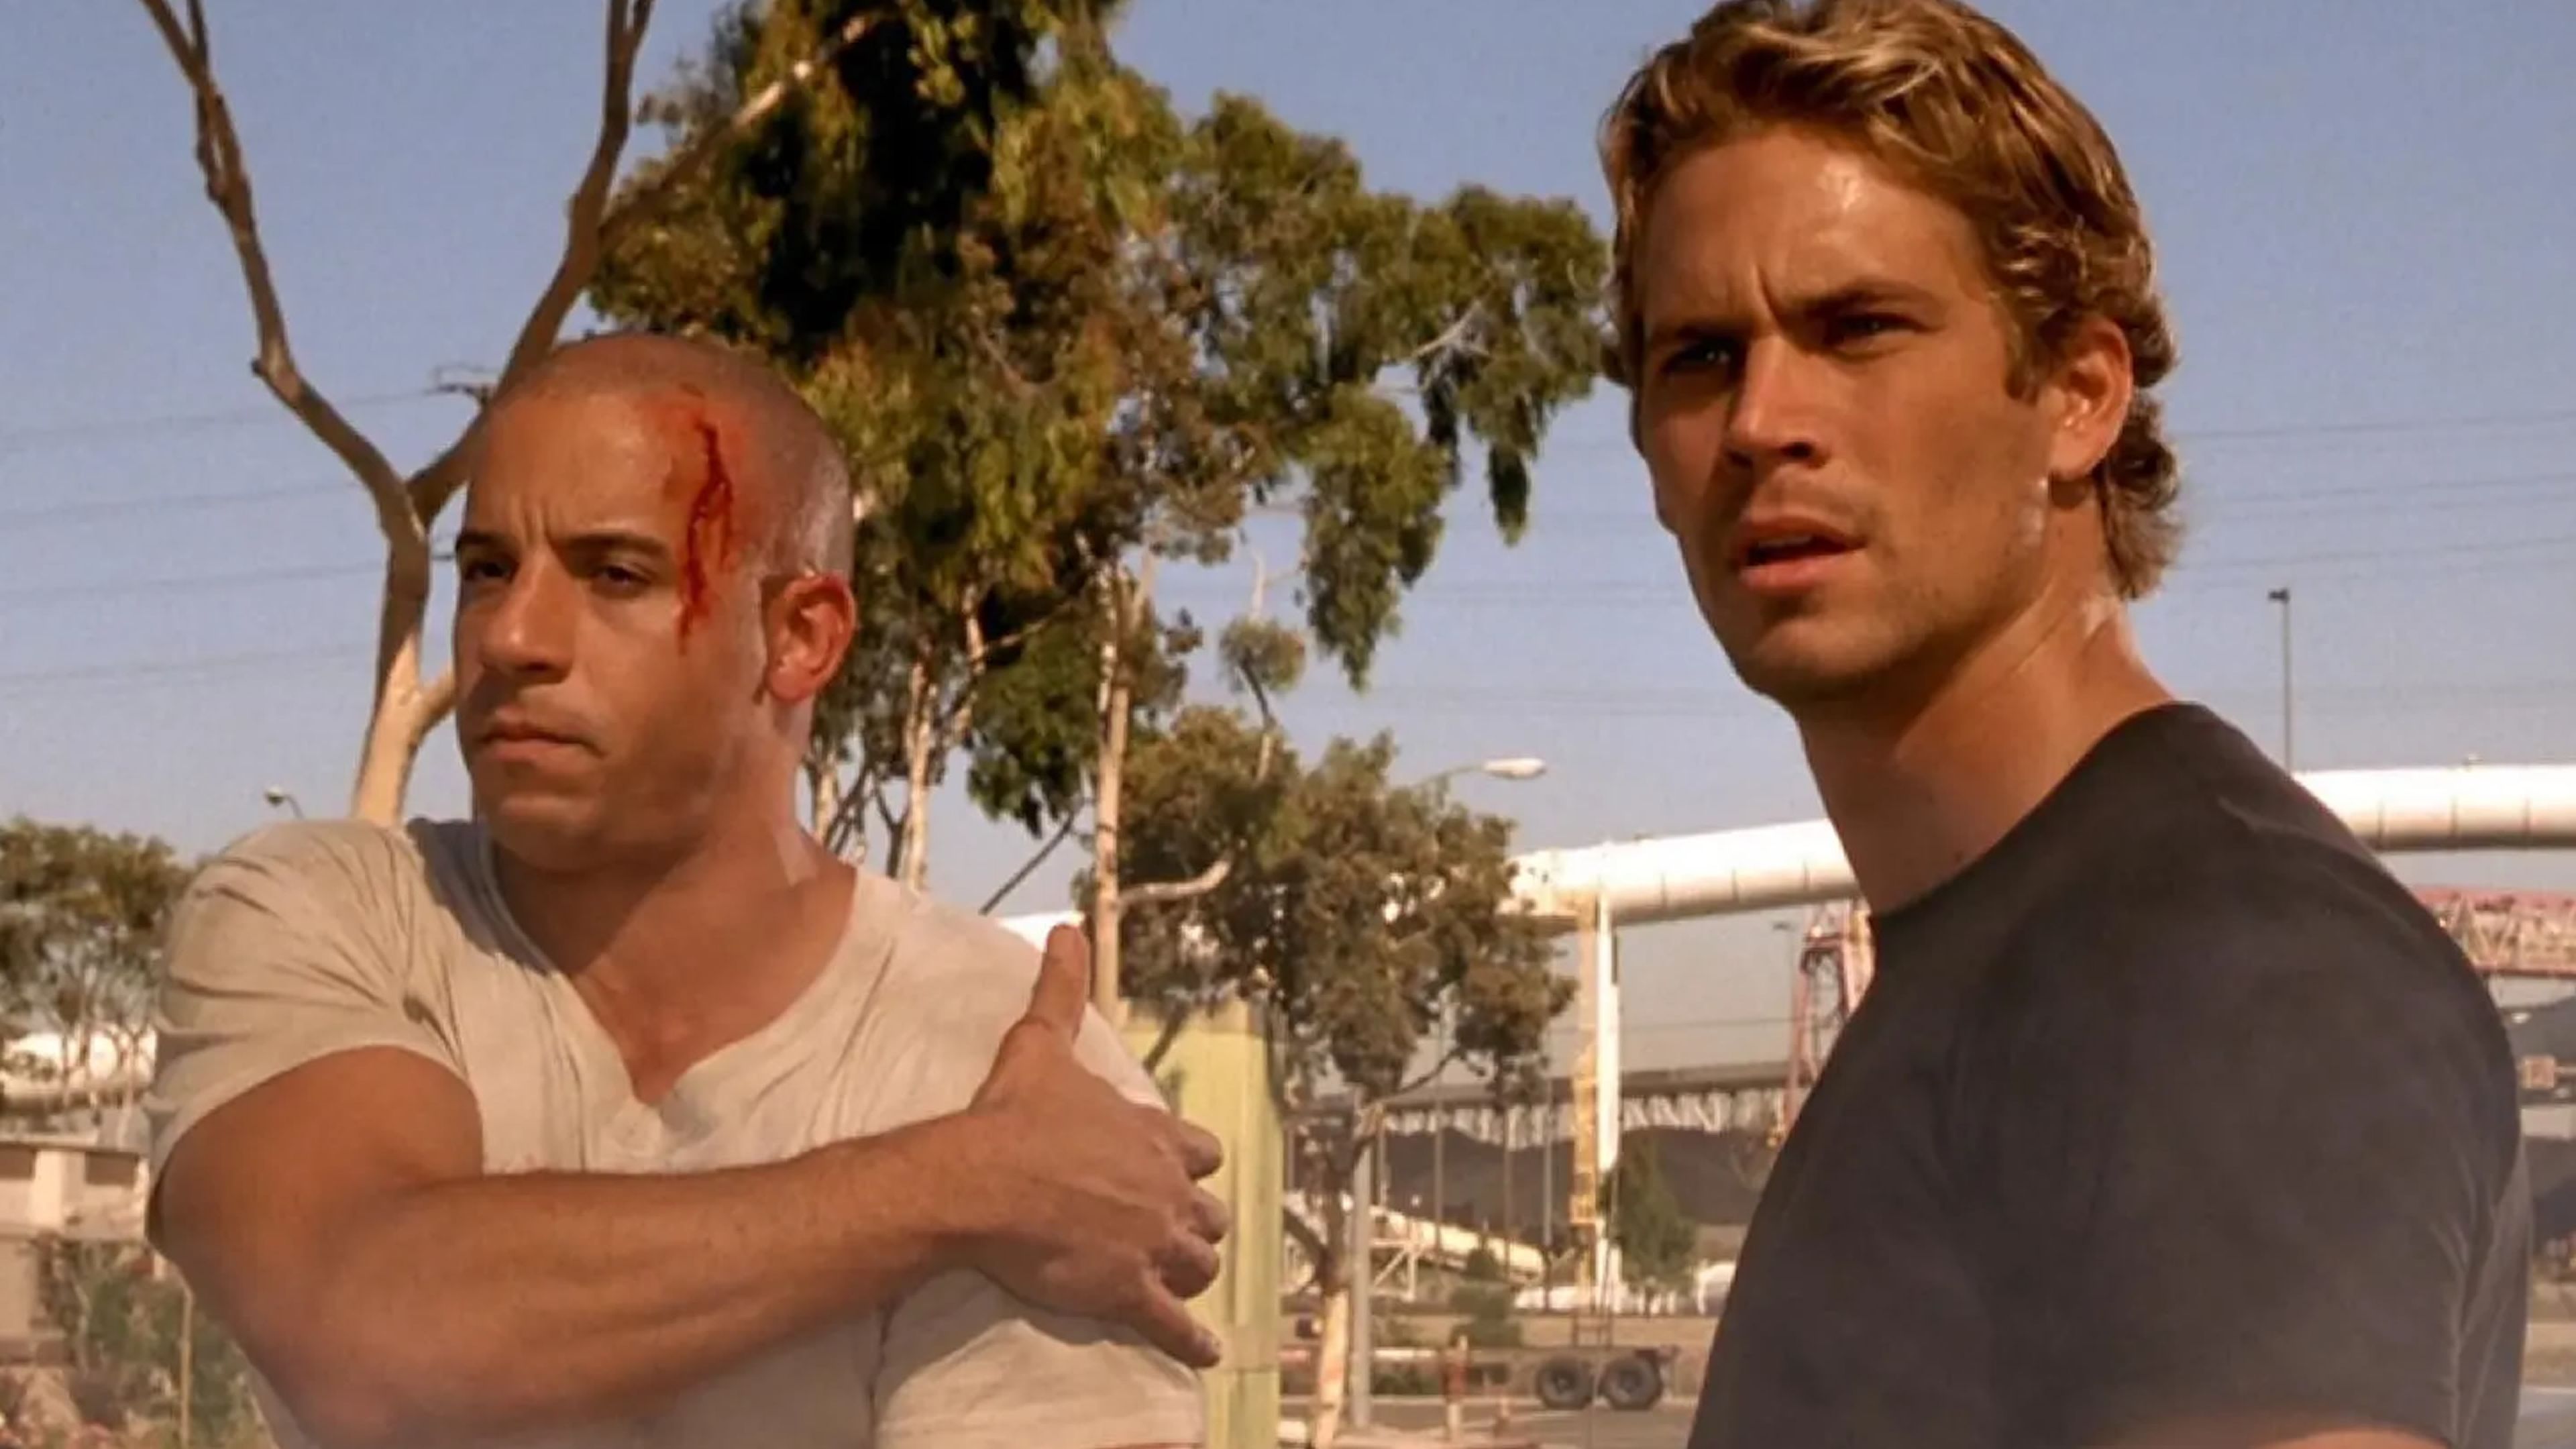 The Fast & the Furious: A todo gas (2001) - Dominic Toretto (Vin Diesel) y Brian O'Conner (Paul Walker)